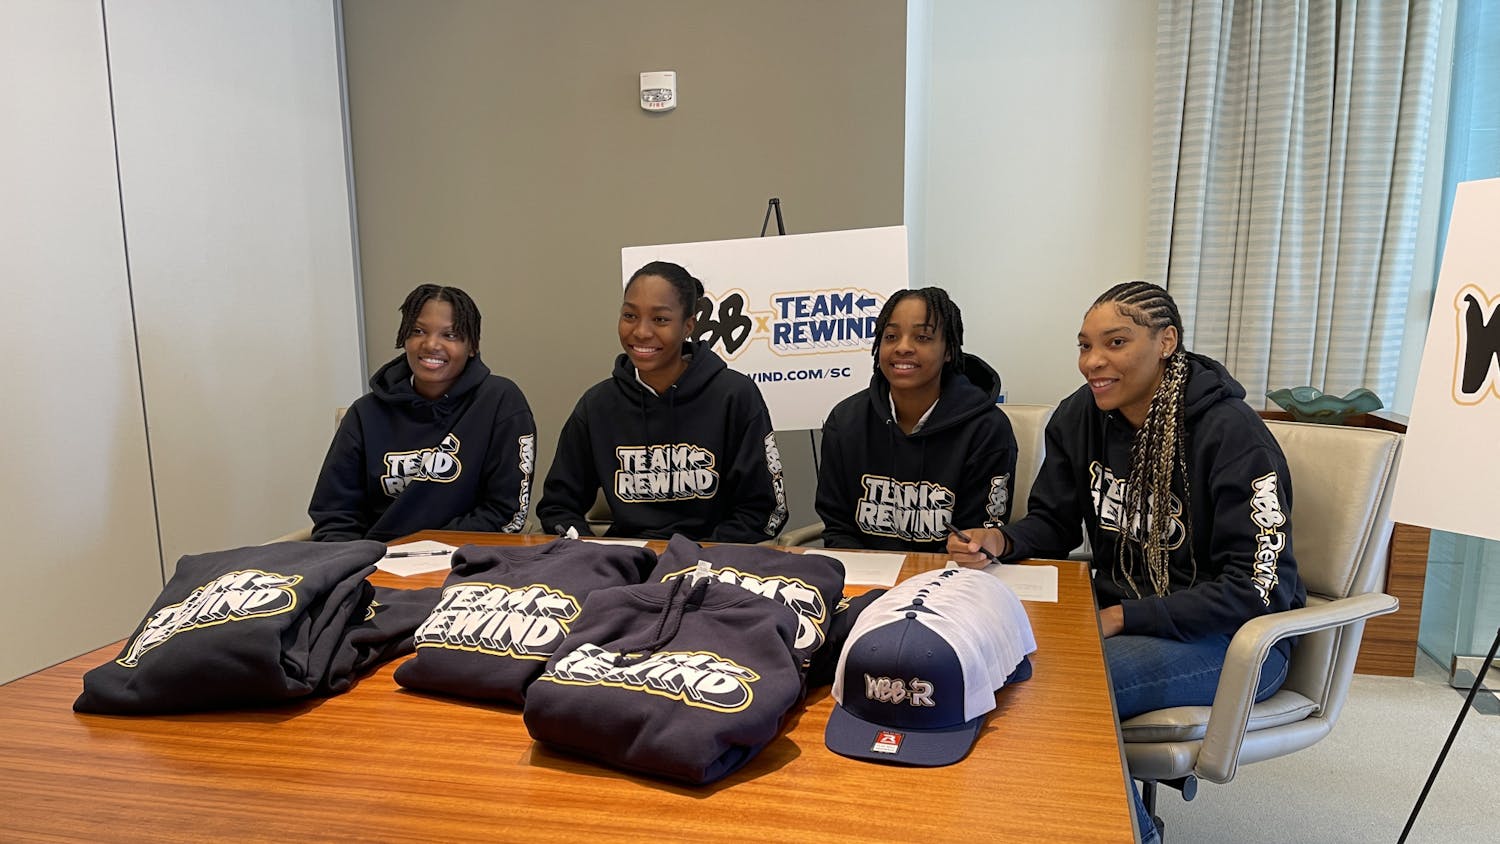 Women’s basketball players (left to right) Sania Feagin, Bree Hall, Kierra Fletcher and Victaria Saxton smile after signing their NIL deals with Rewind on Oct. 6, 2022. South Carolina women’s basketball is partnering with the Rewind program to help fight diabetes in the state of South Carolina.